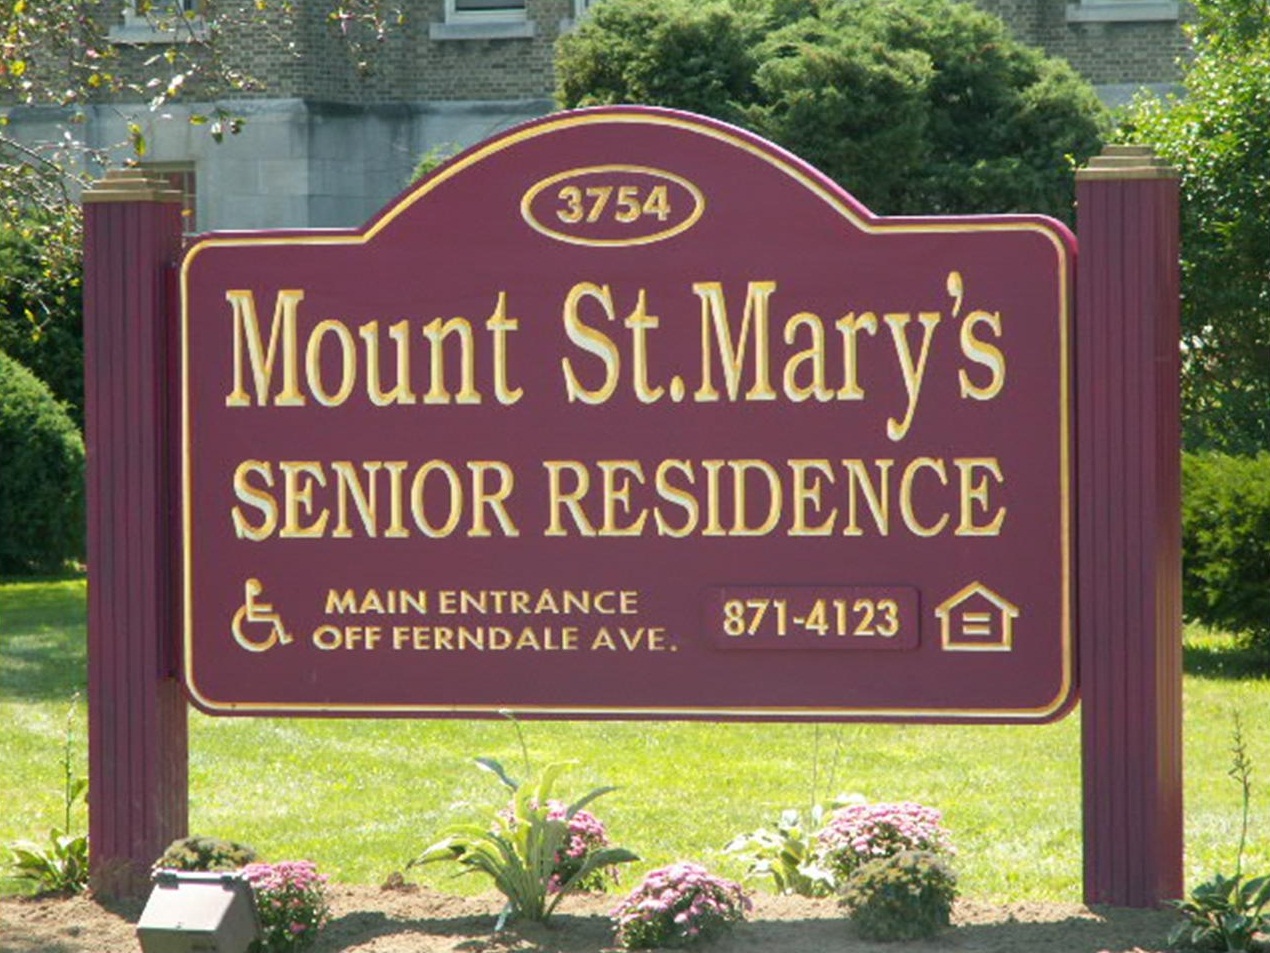 MOUNT ST. MARY'S